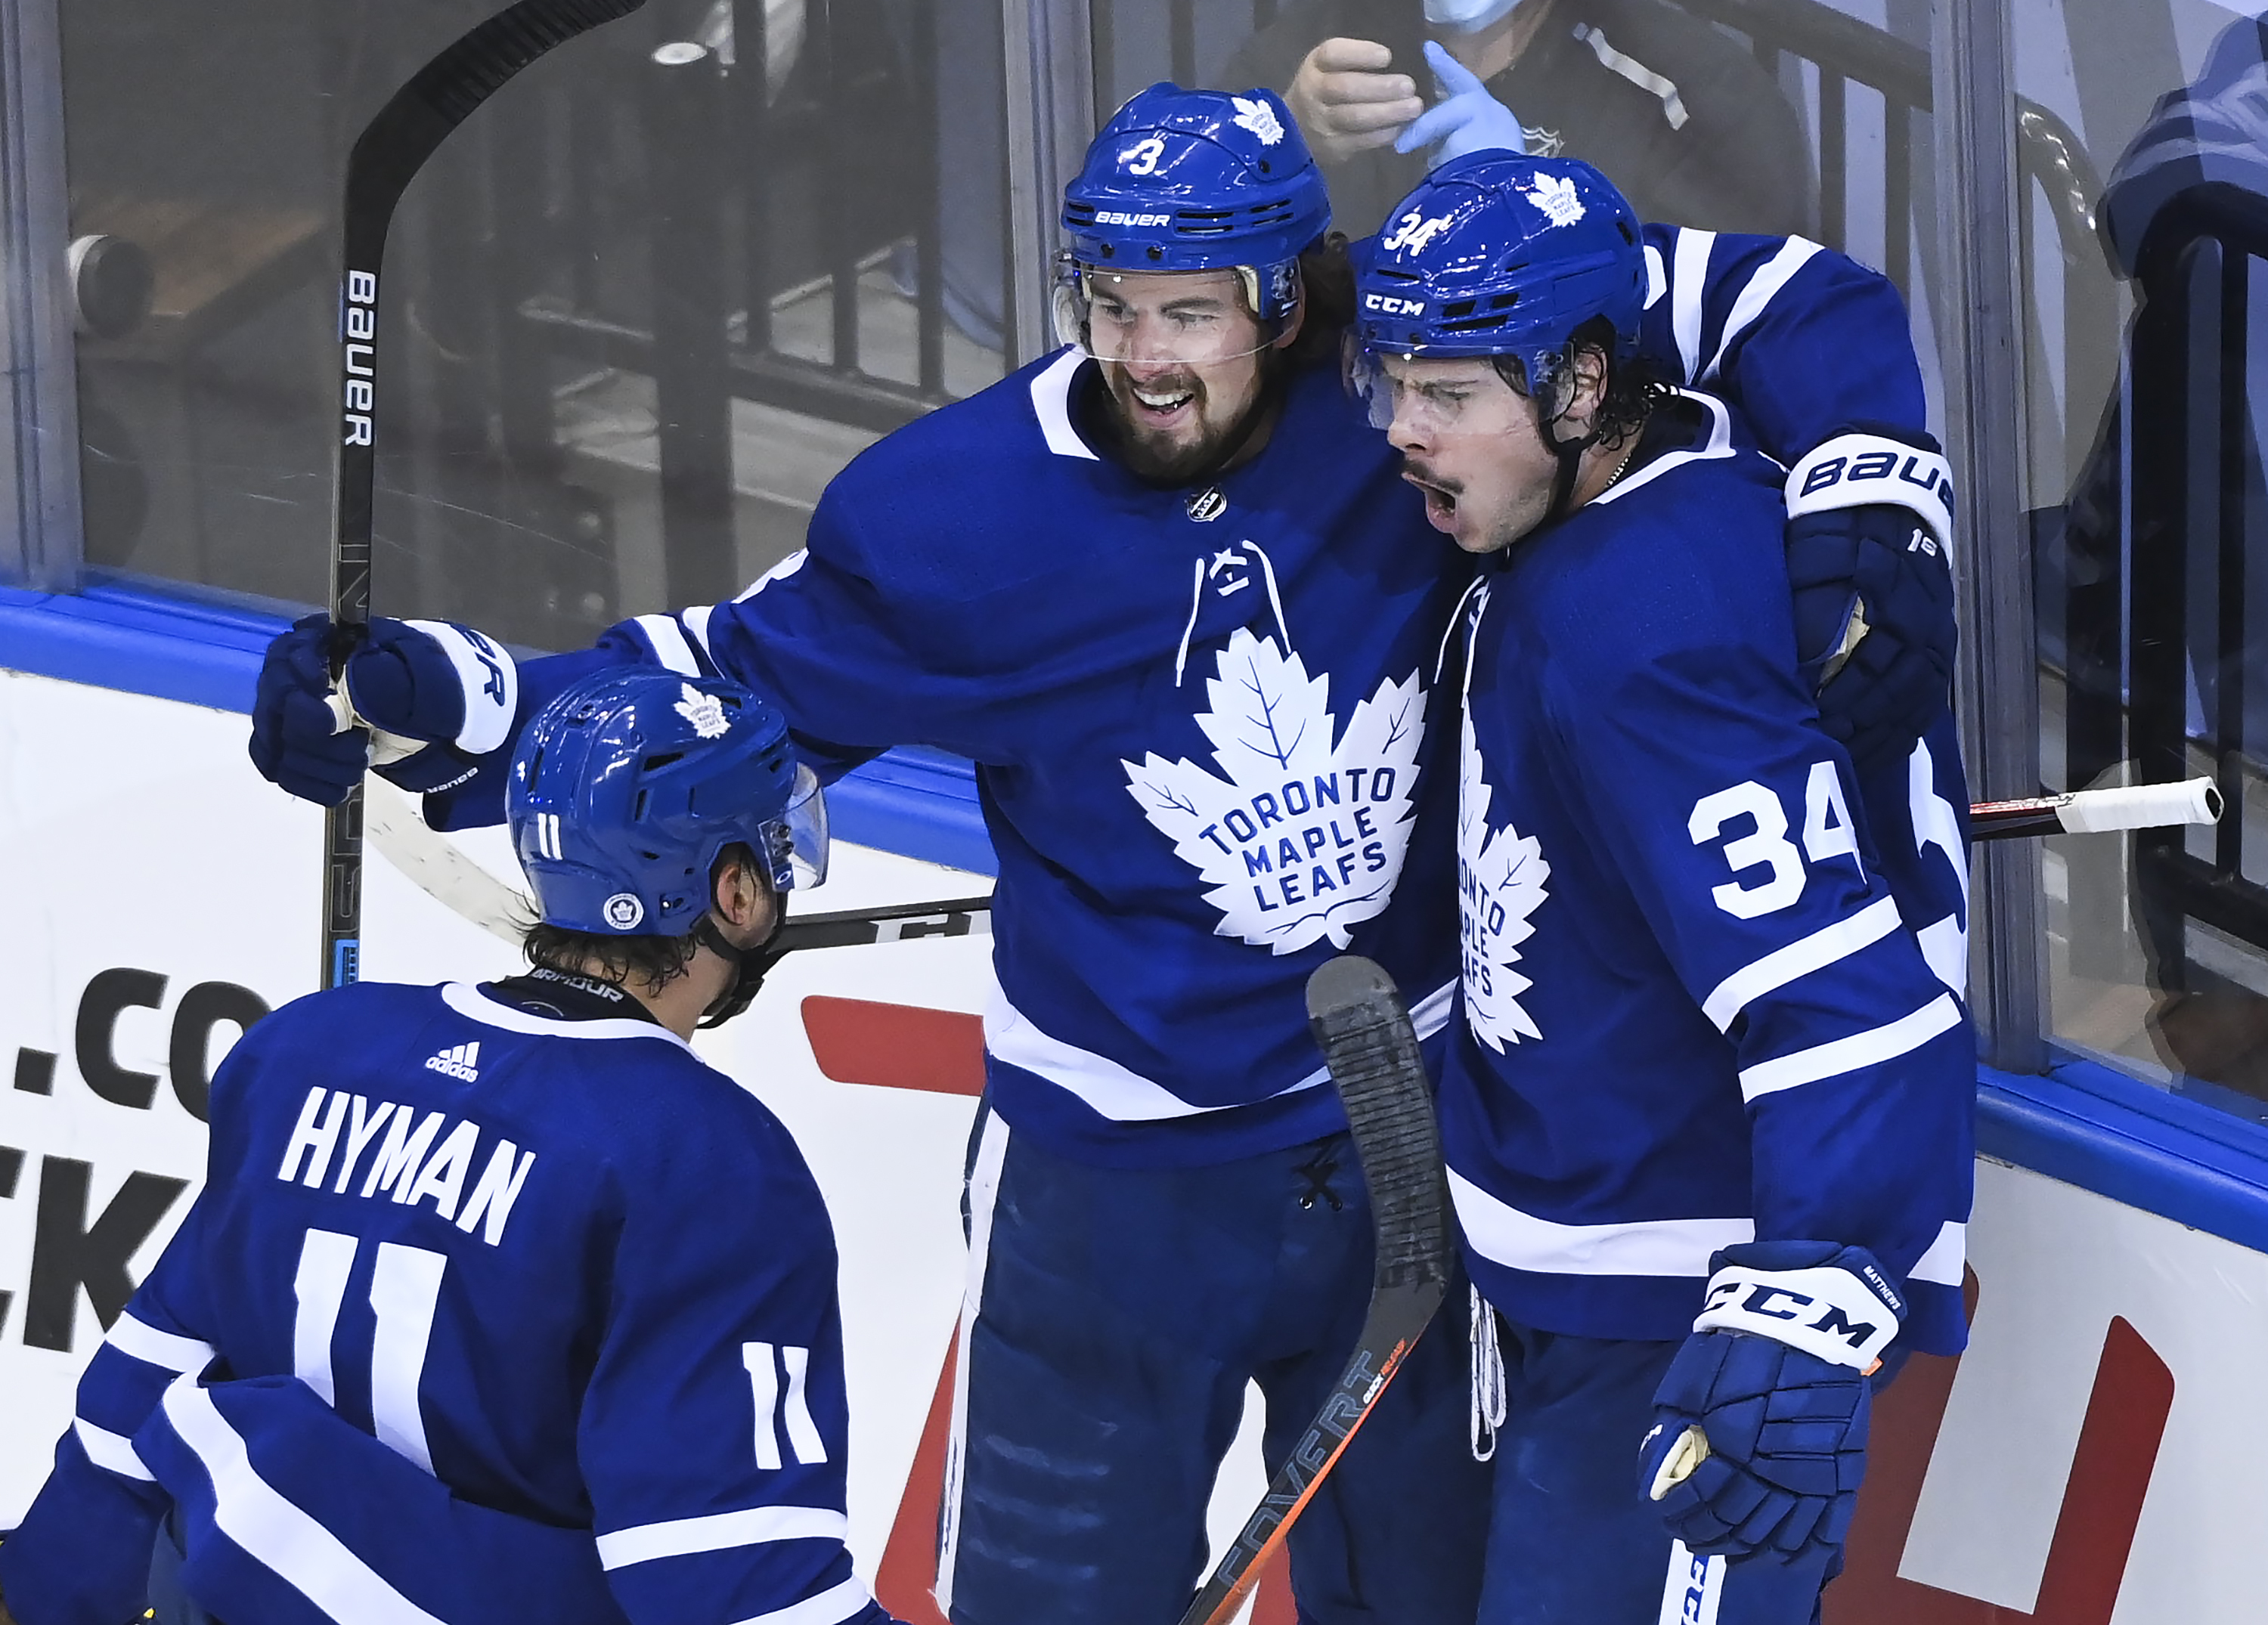 Player photos for the 2019-20 Toronto Maple Leafs at